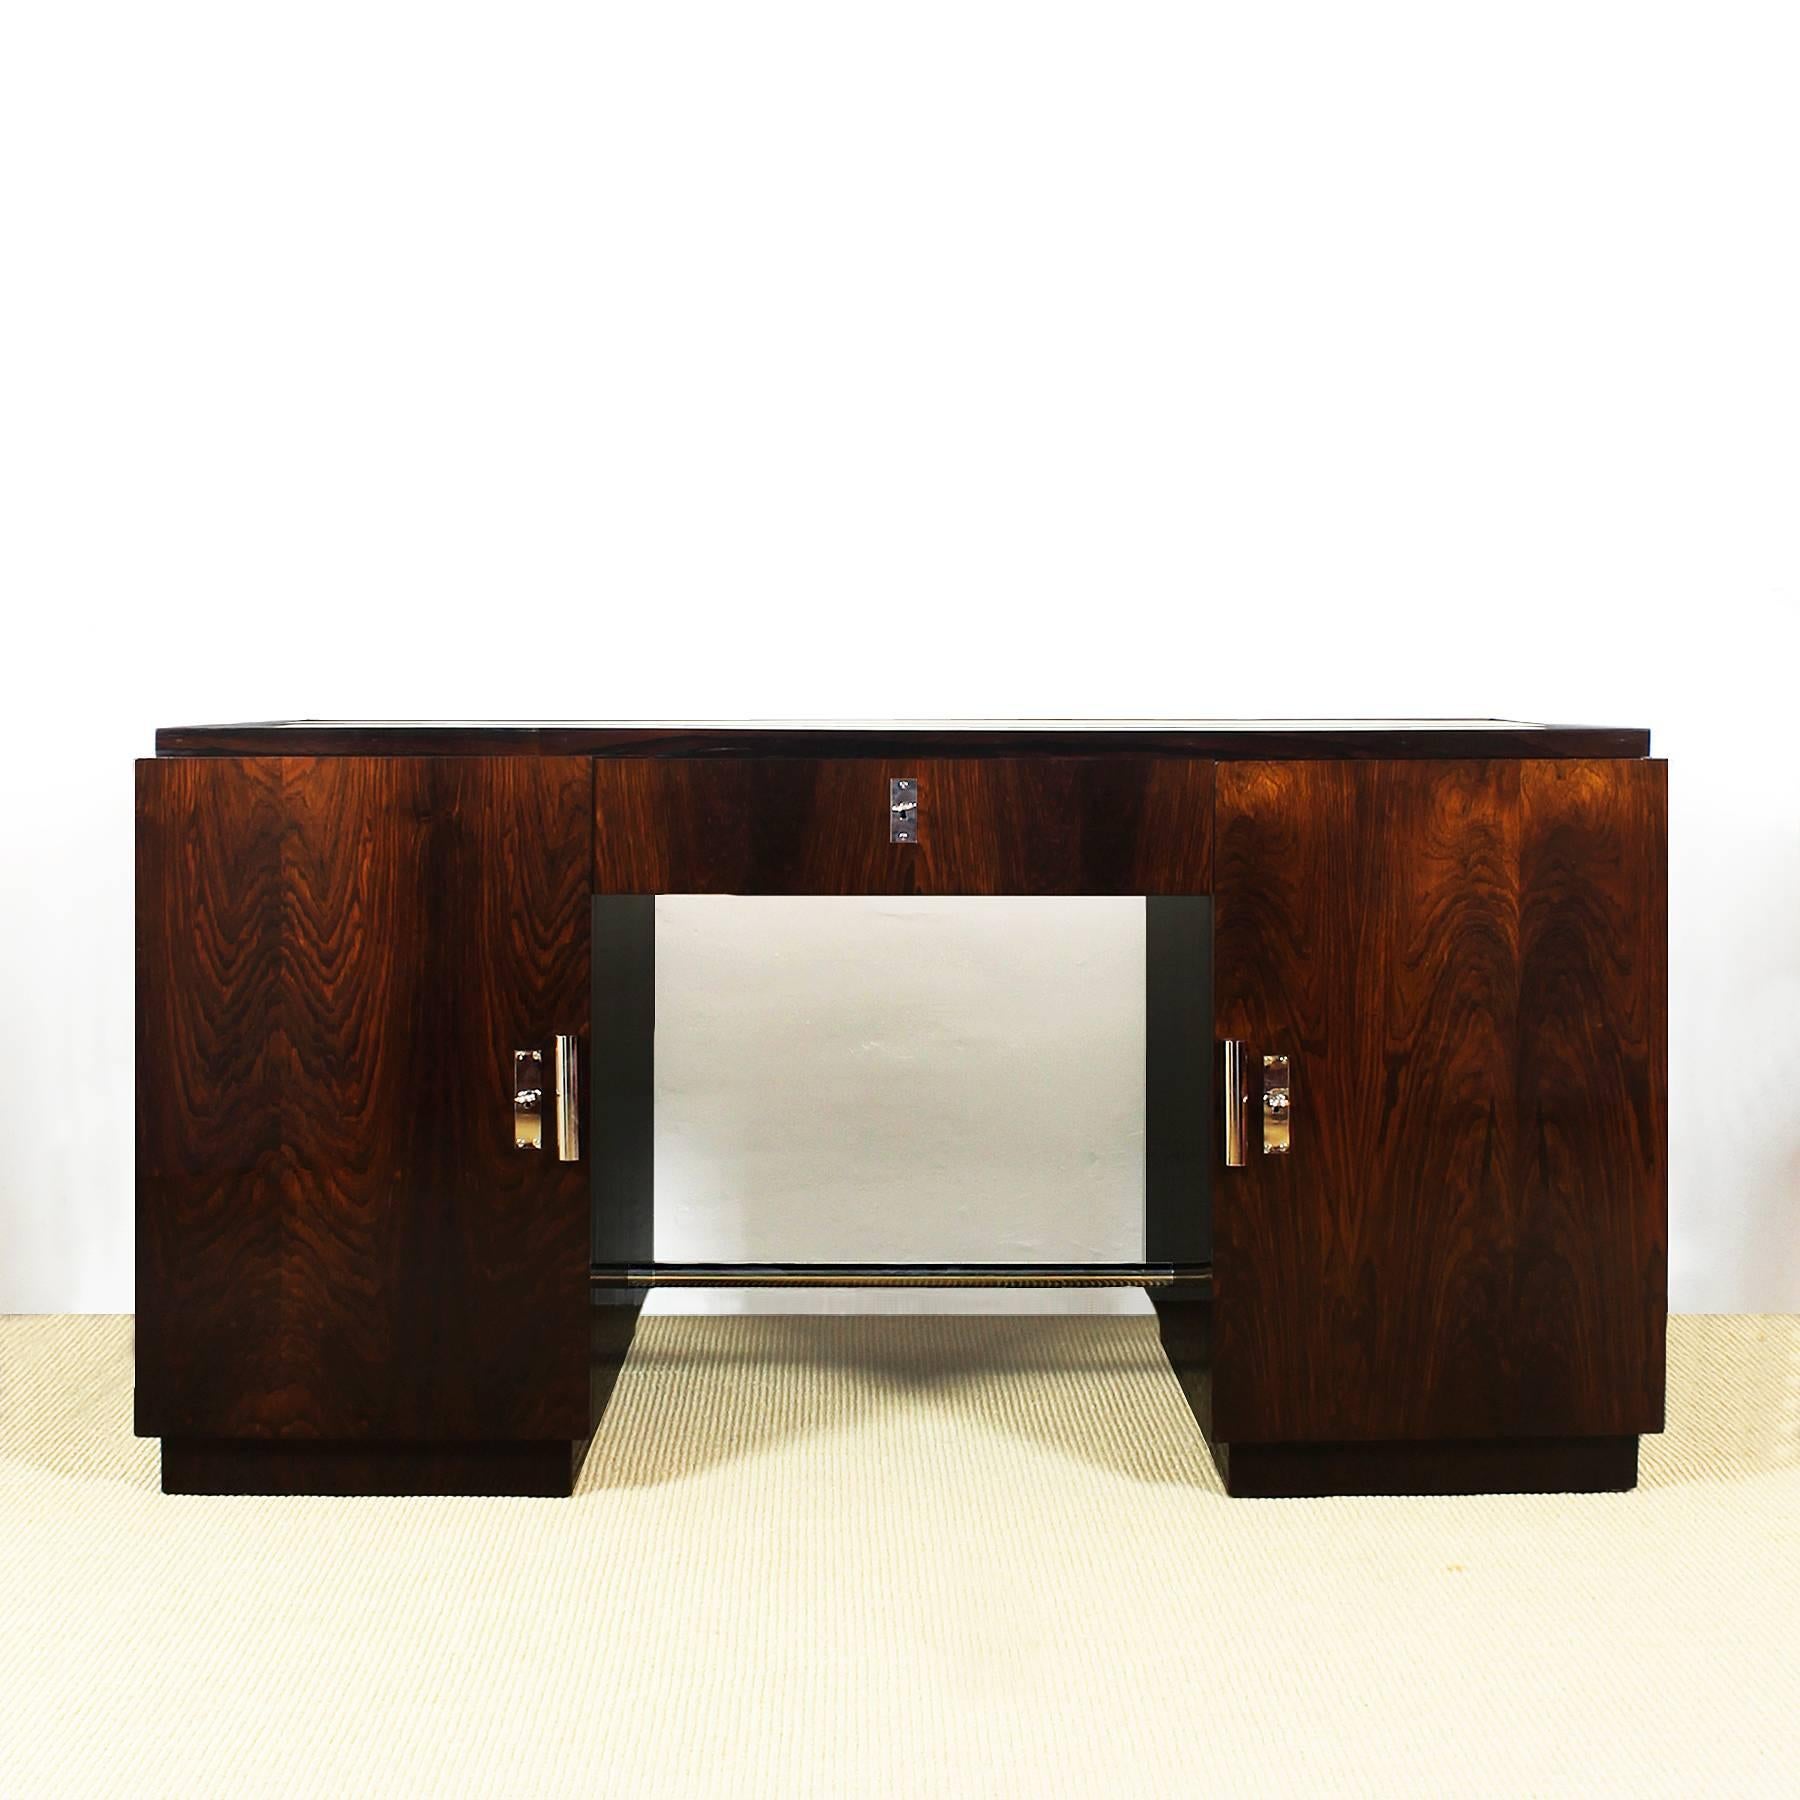 Spectacular set of Art Deco cubist desk and its armchair, Rio rosewood veneer, French polish. Double faced desk with three binders and a drawer in the left side and three drawers in the right one, large central drawer; full grain leather on top;